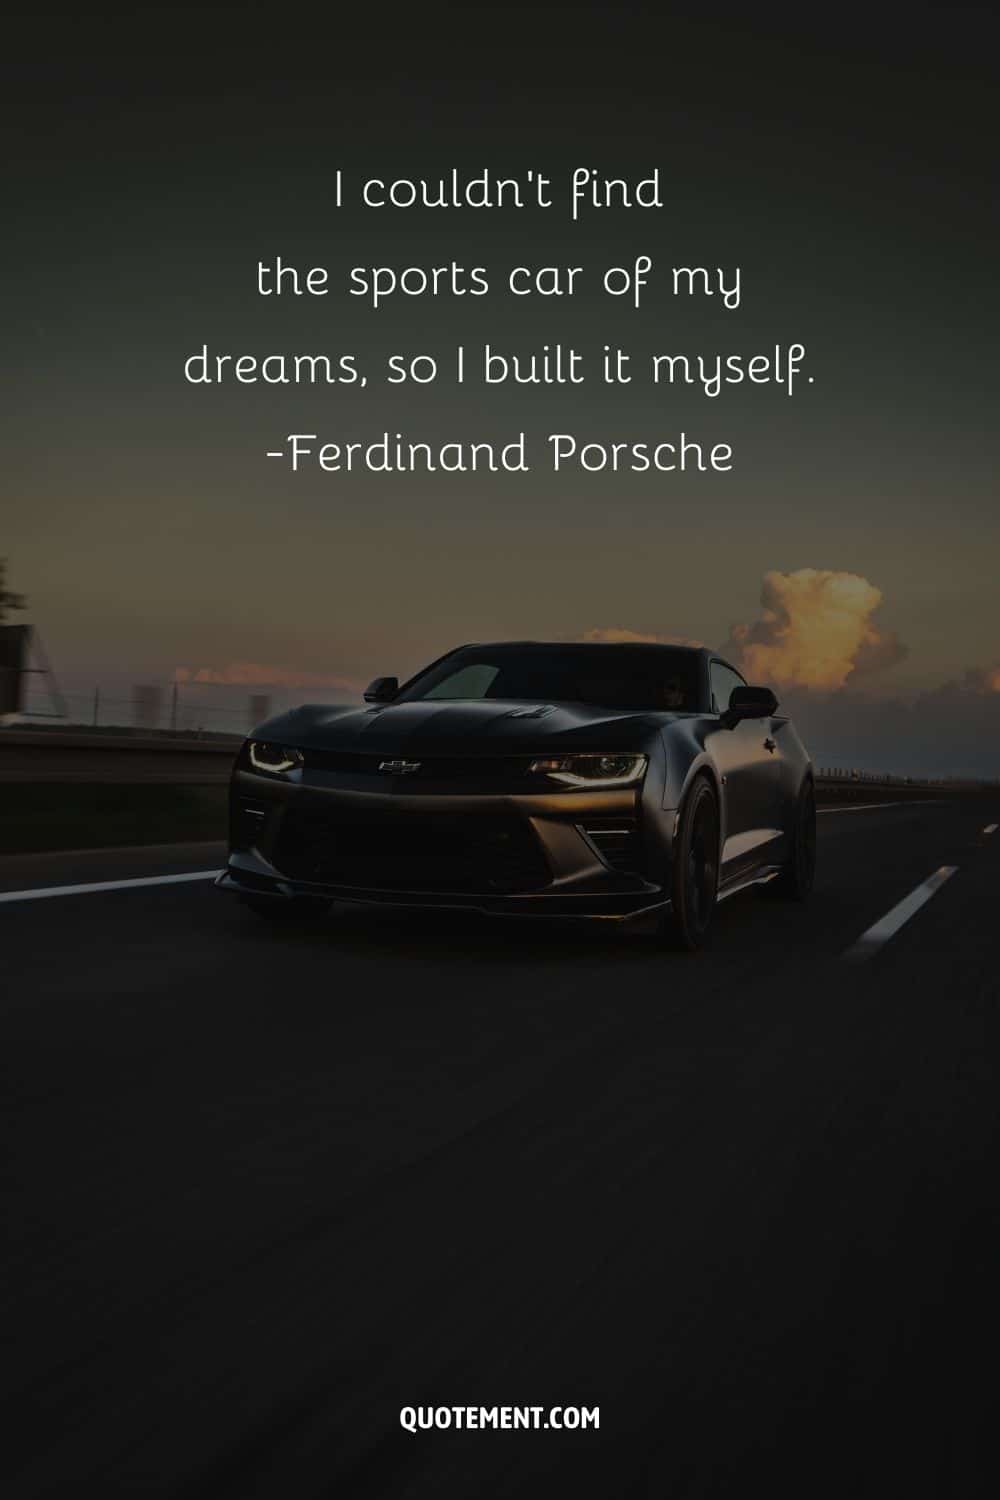 “I couldn’t find the sports car of my dreams, so I built it myself.” ― Ferdinand Porsch